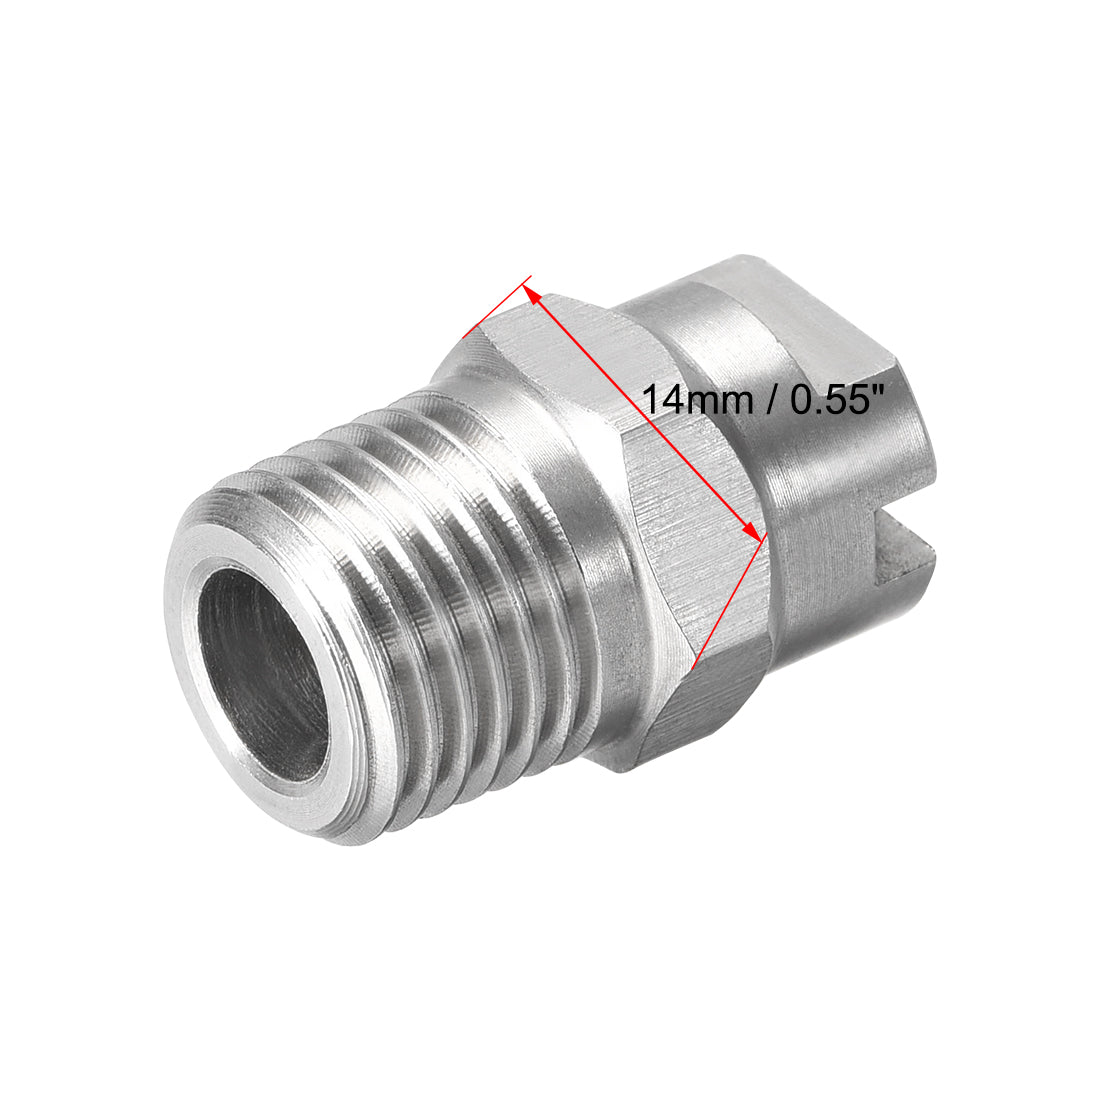 Uxcell Uxcell Flat Fan Spray Tip - 1/4BSPT Male Thread 304 Stainless Steel Nozzle - 95 Degree 2.8mm Orifice Diameter - 2 Pcs